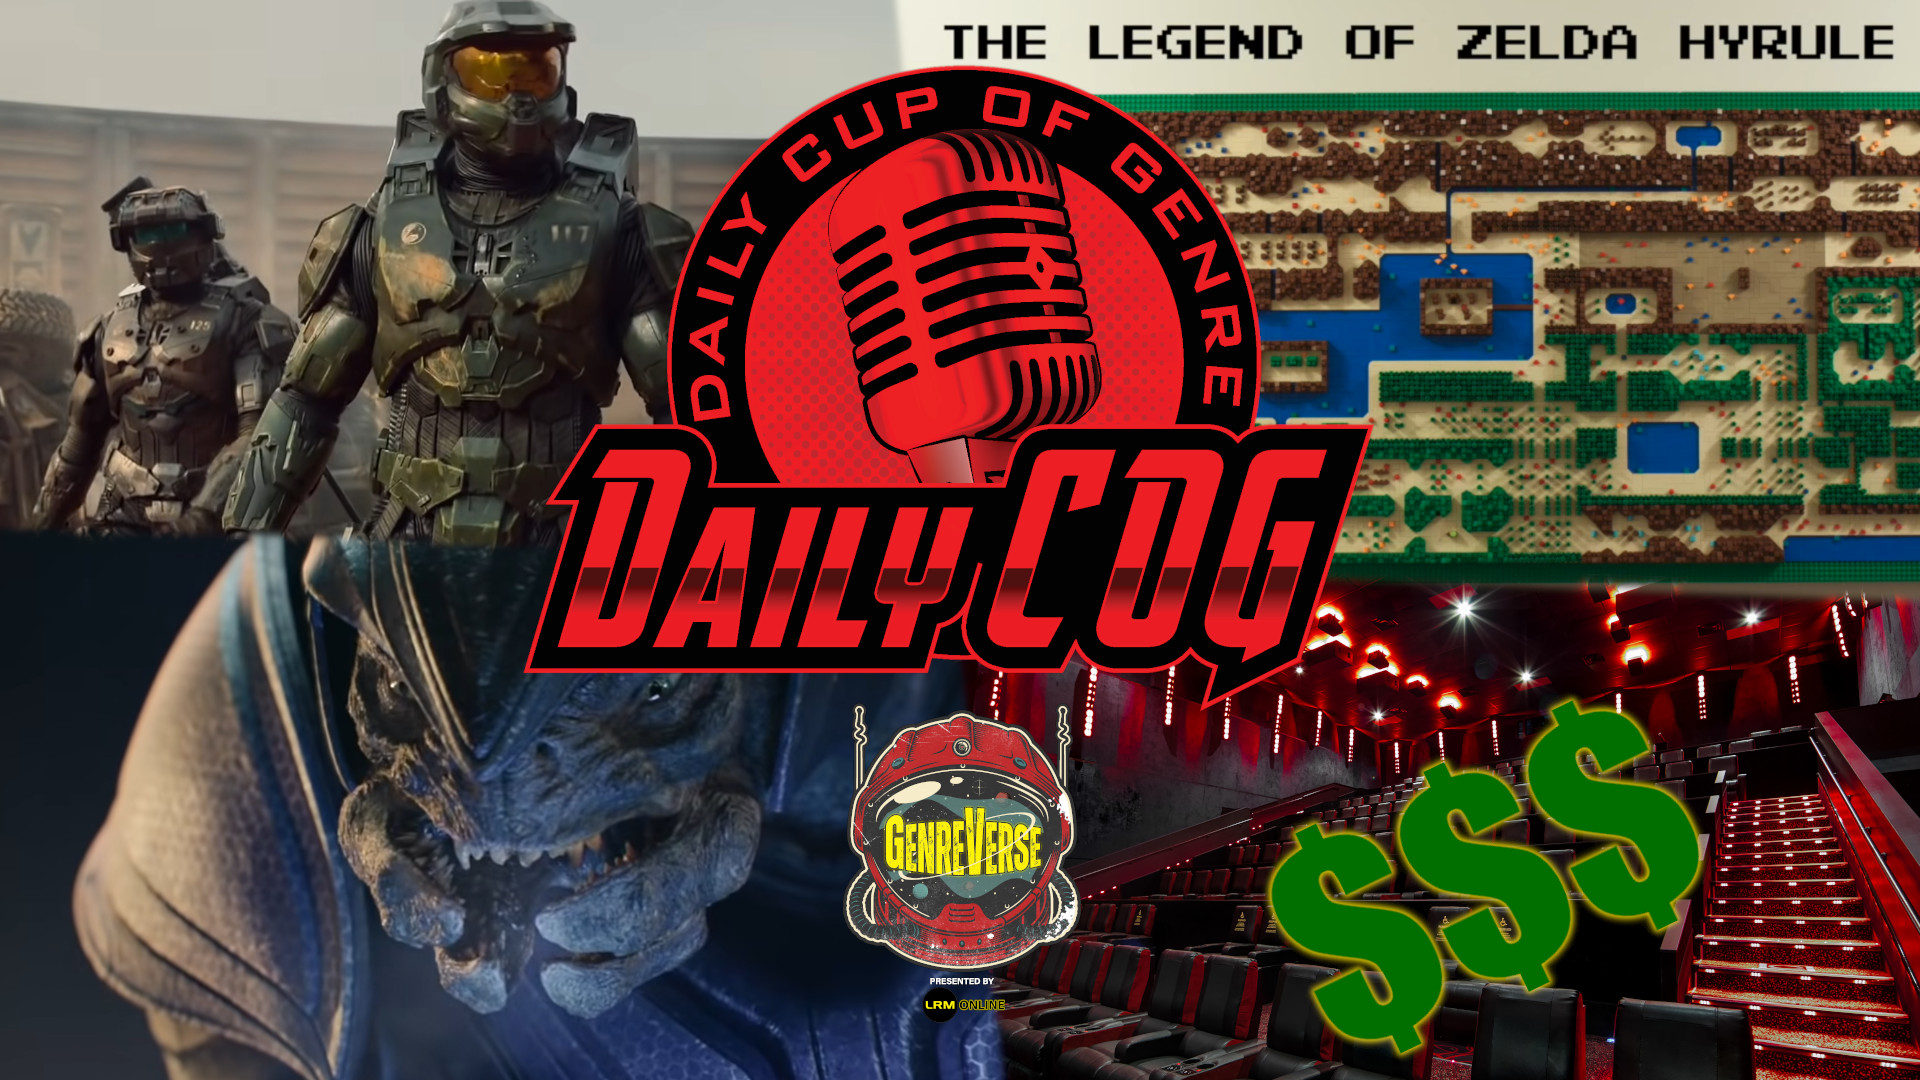 Weekend Box Office Numbers, Halo Trailer Reaction (Looks Good), And Cool Zelda LEGO Build & OG Game Artist’s MTG Cards | Daily COG